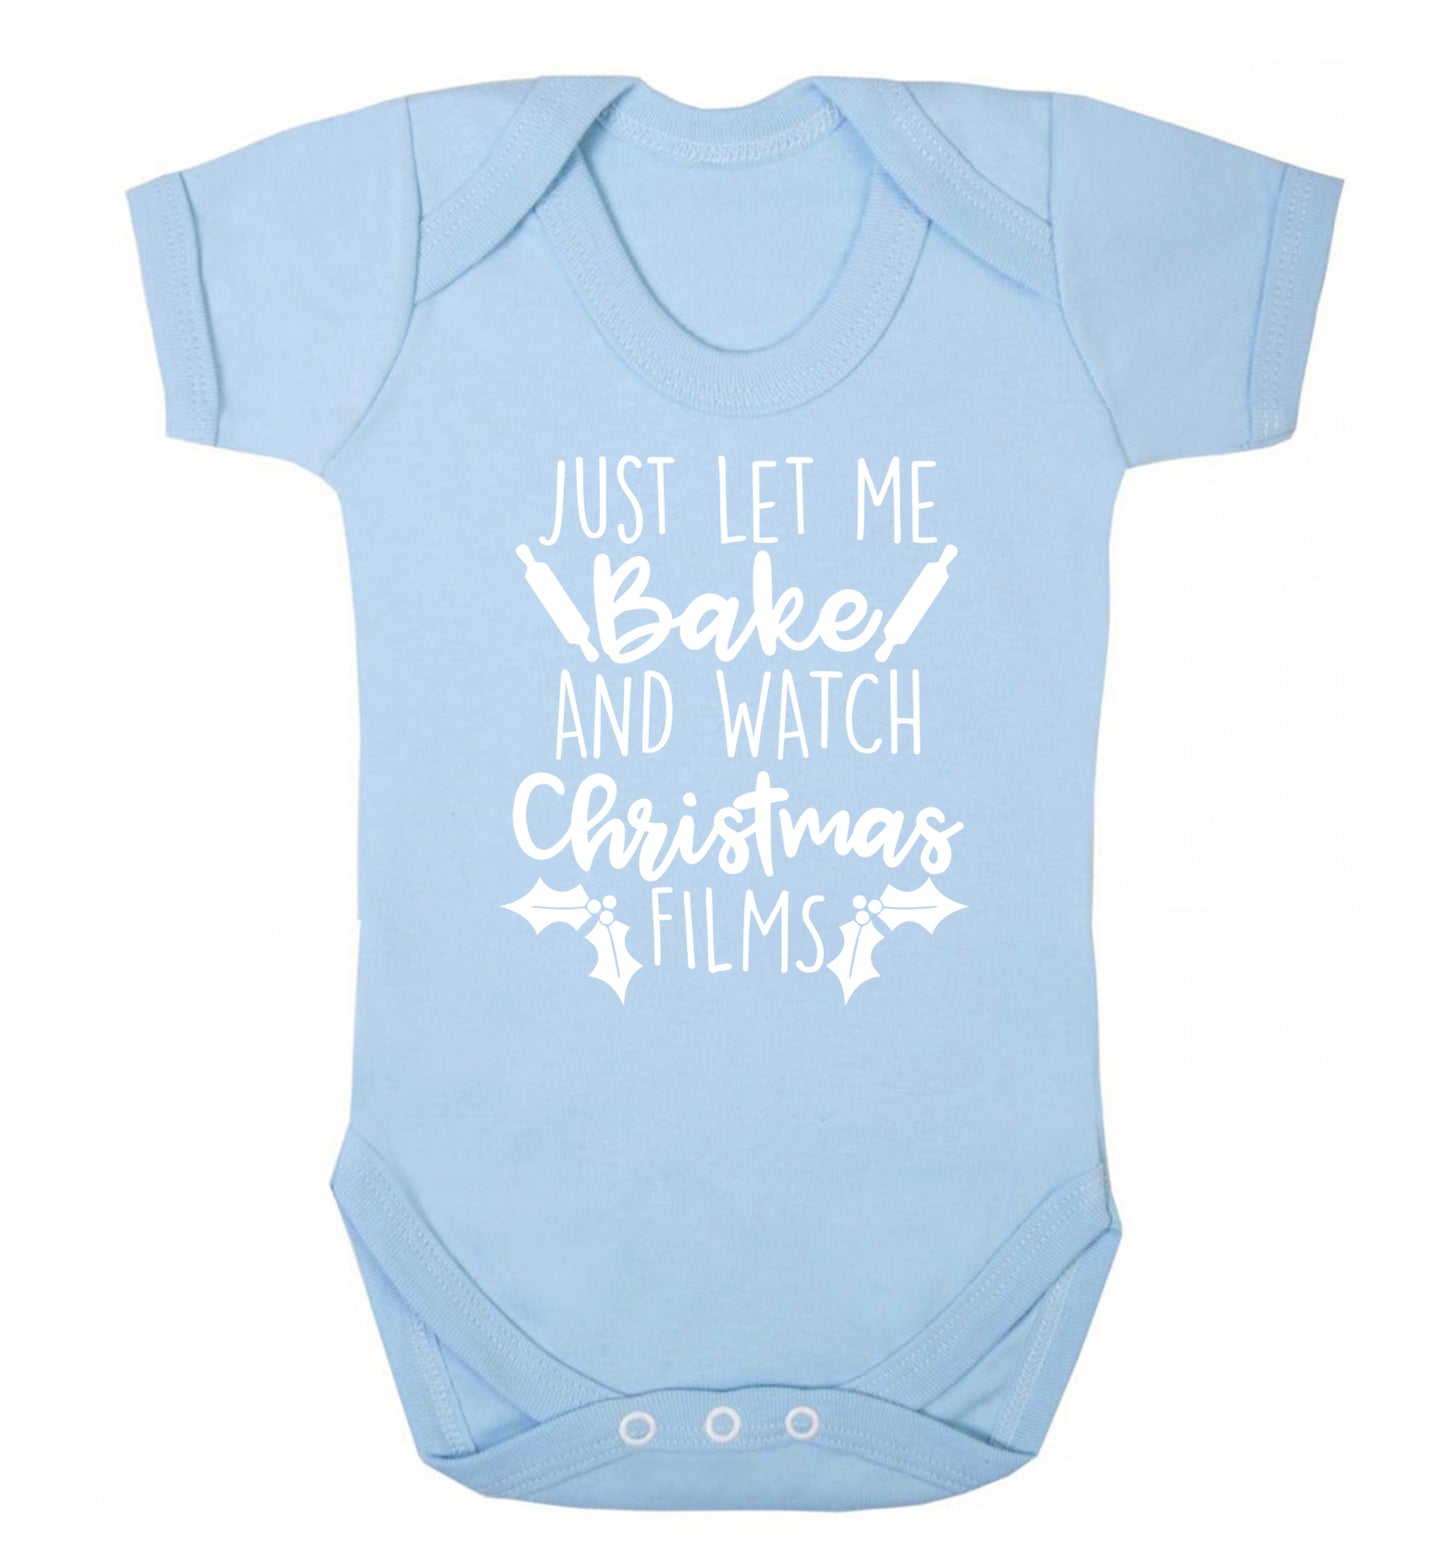 Just let me bake and watch Christmas films Baby Vest pale blue 18-24 months